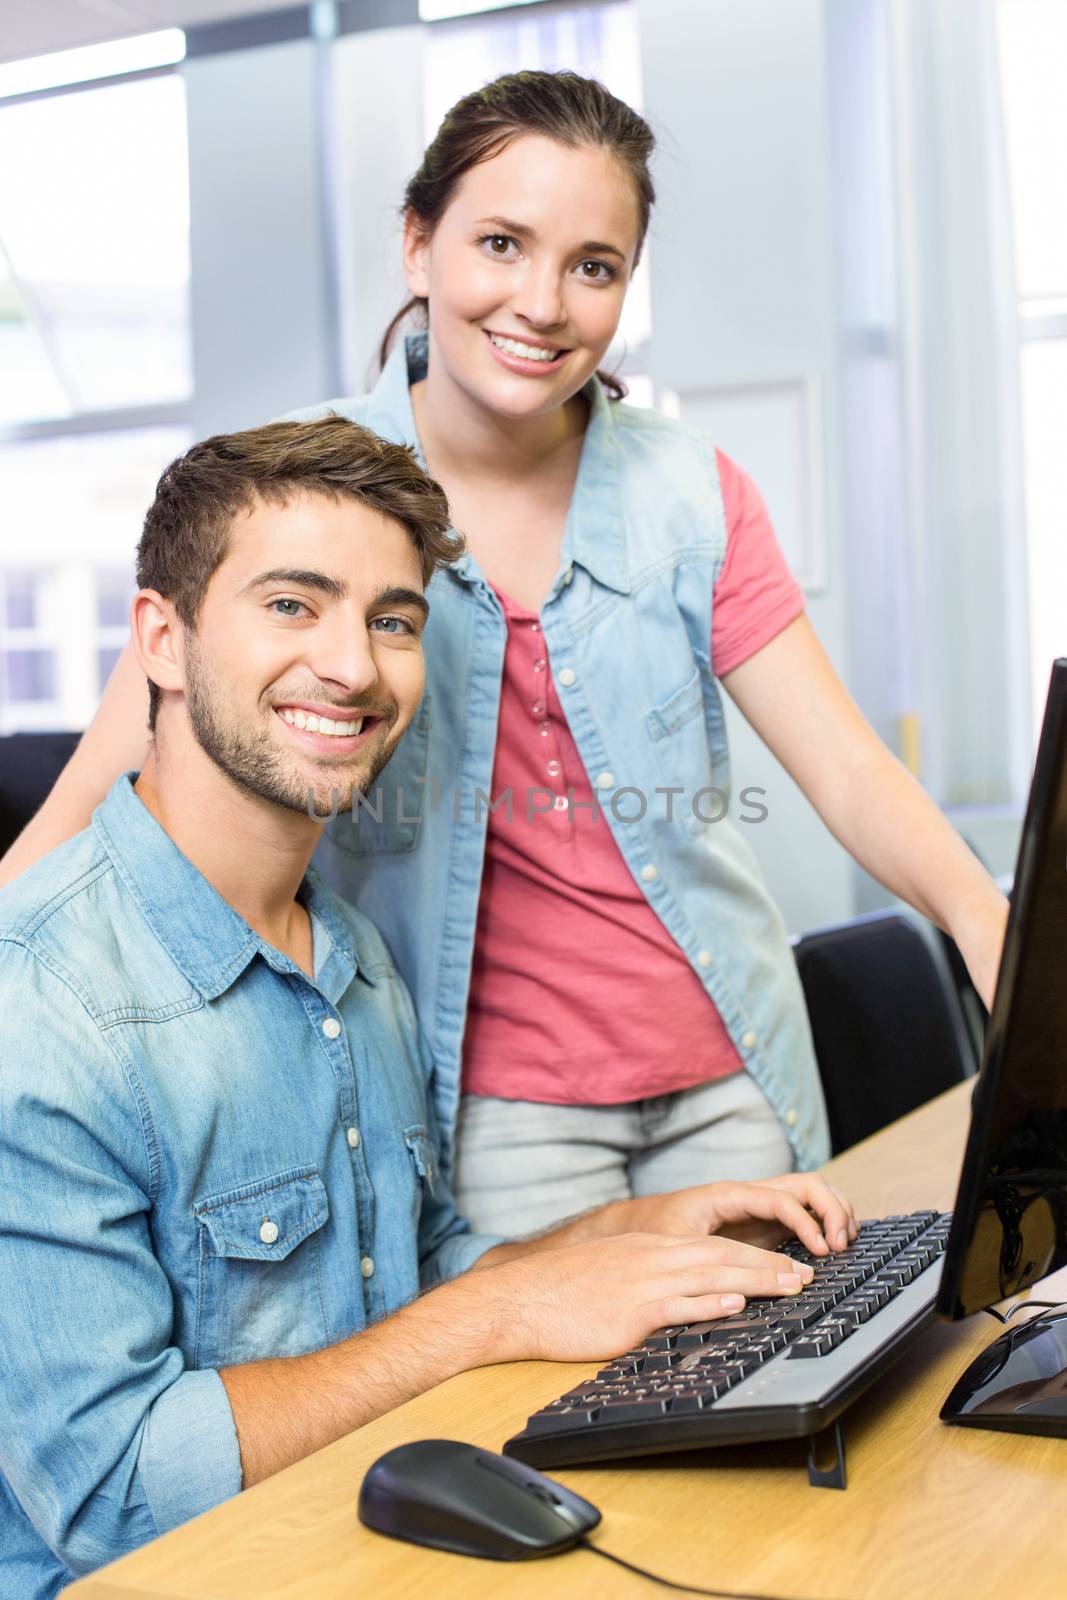 Computer teacher helping pretty female student in his class